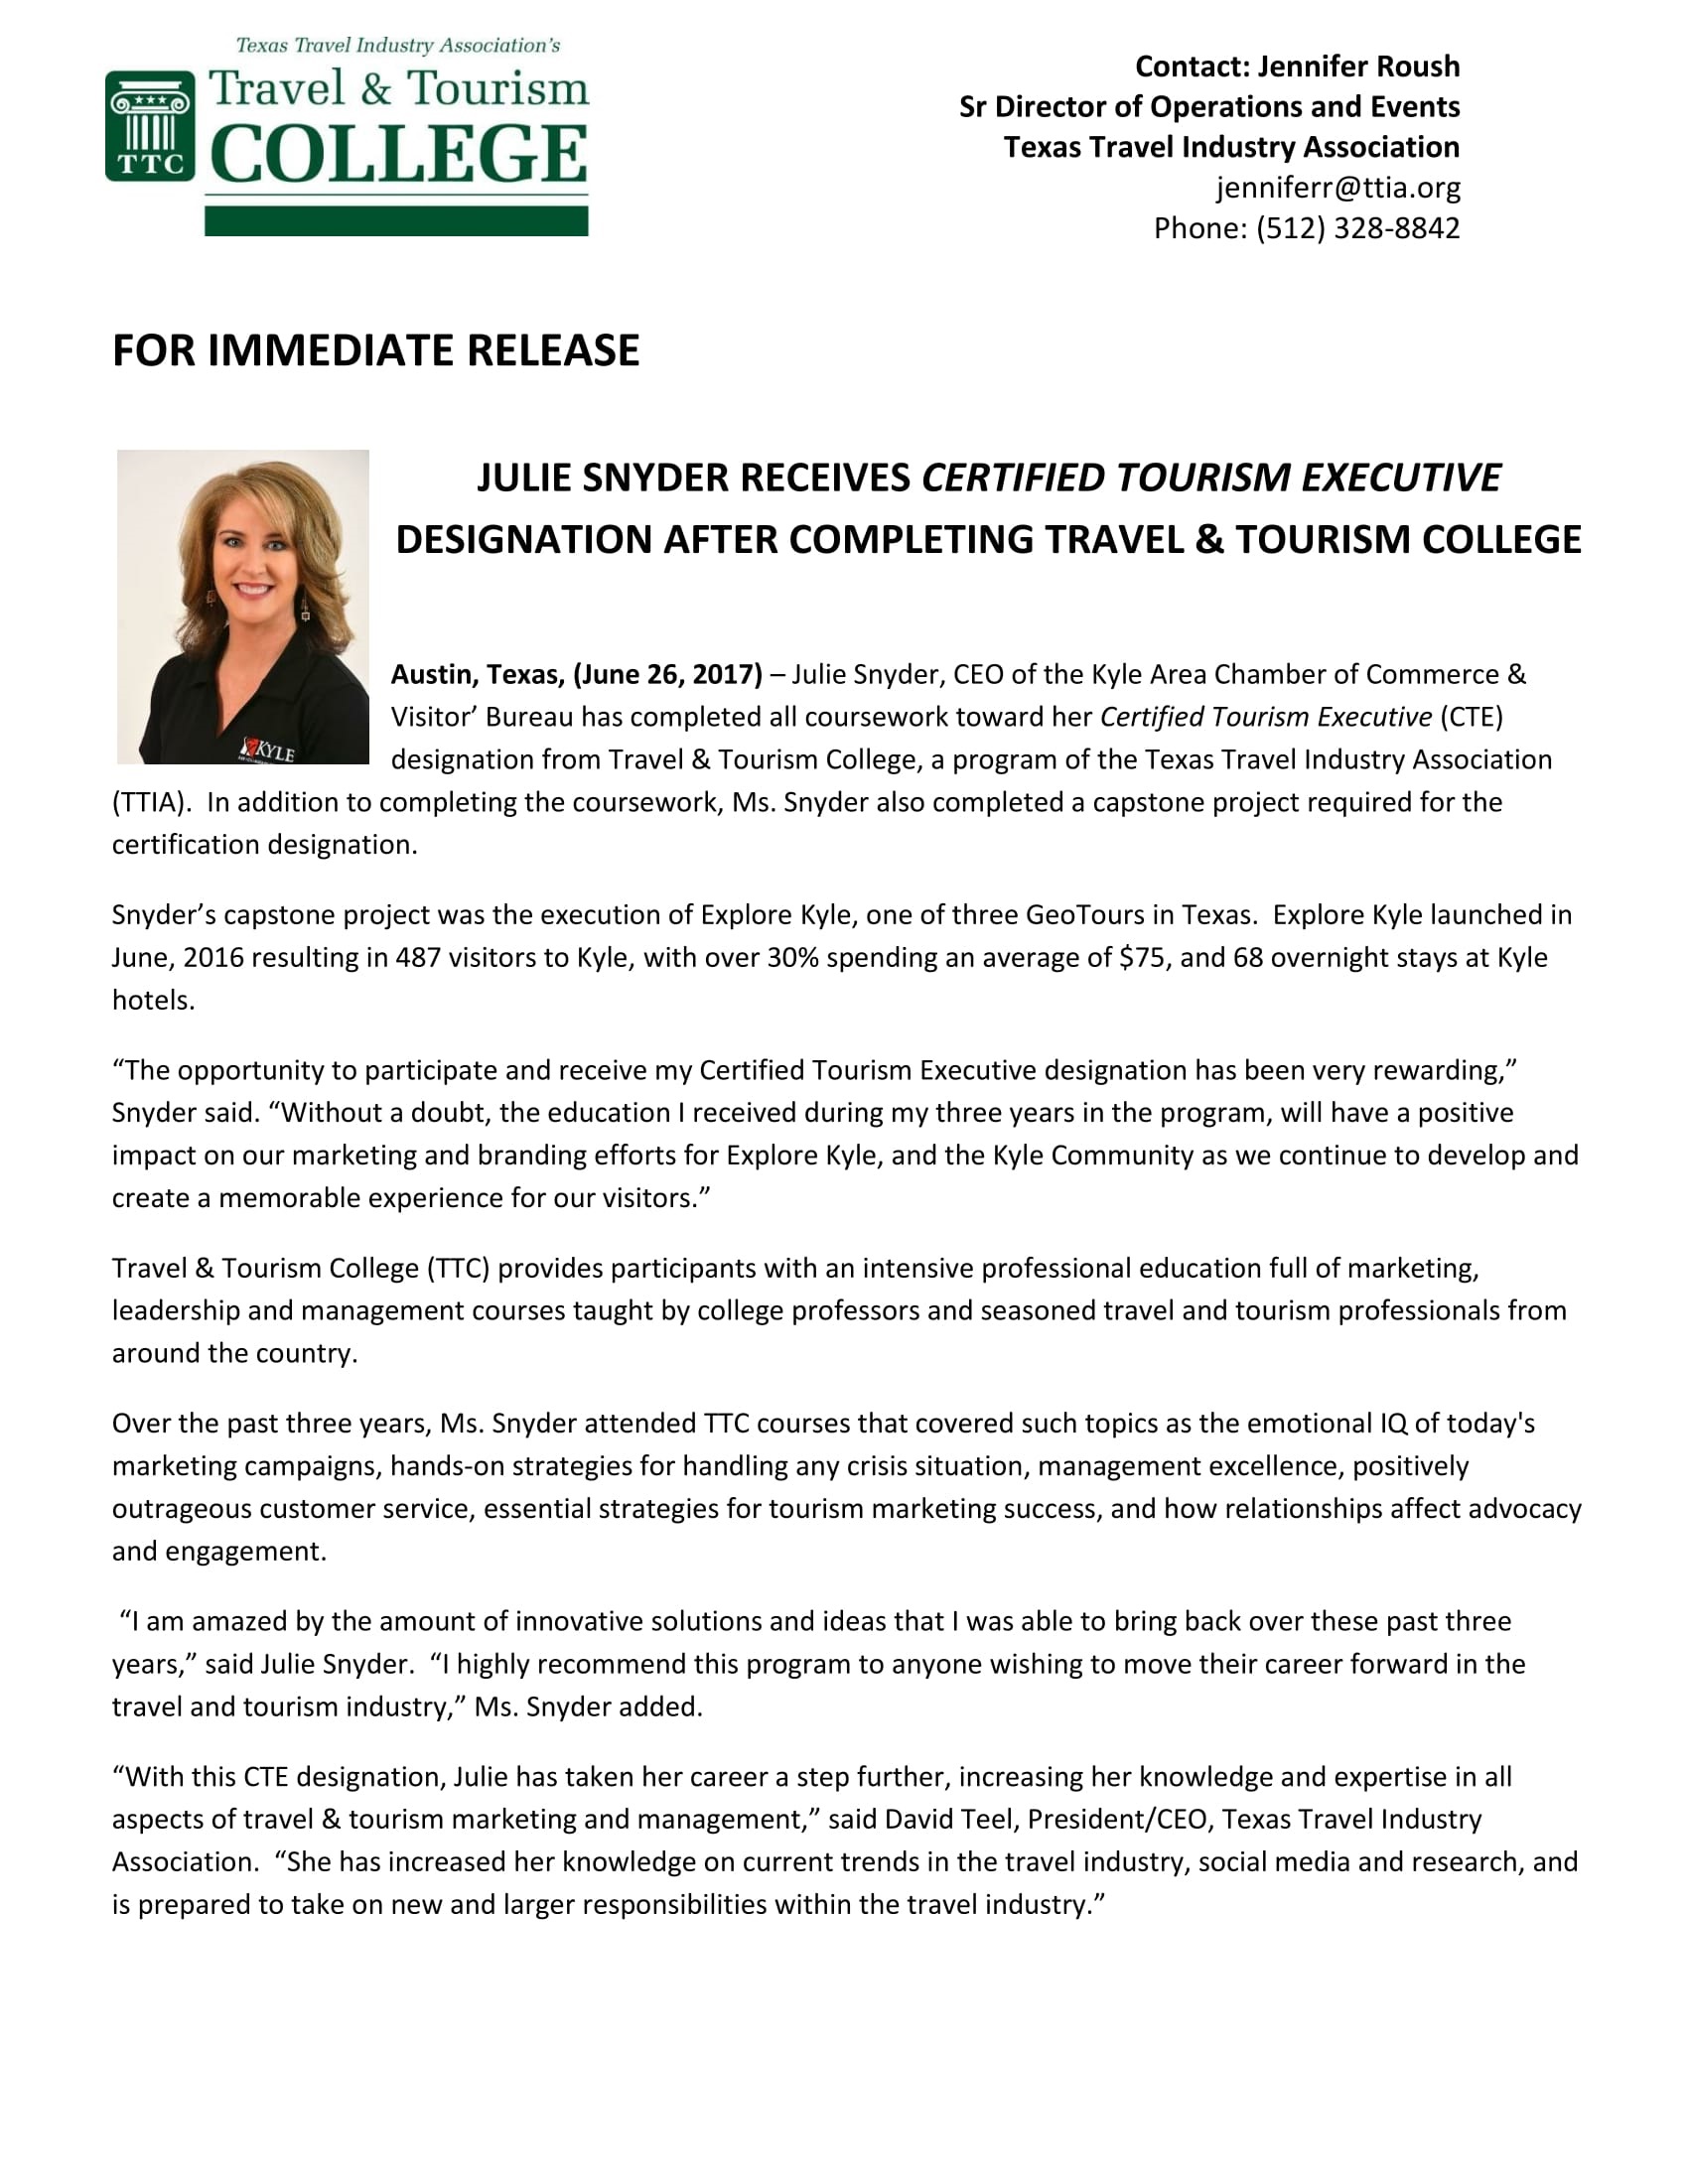 Julie Snyder Receives Certified Tourism Executive Designation After Completing Travel and Tourism College